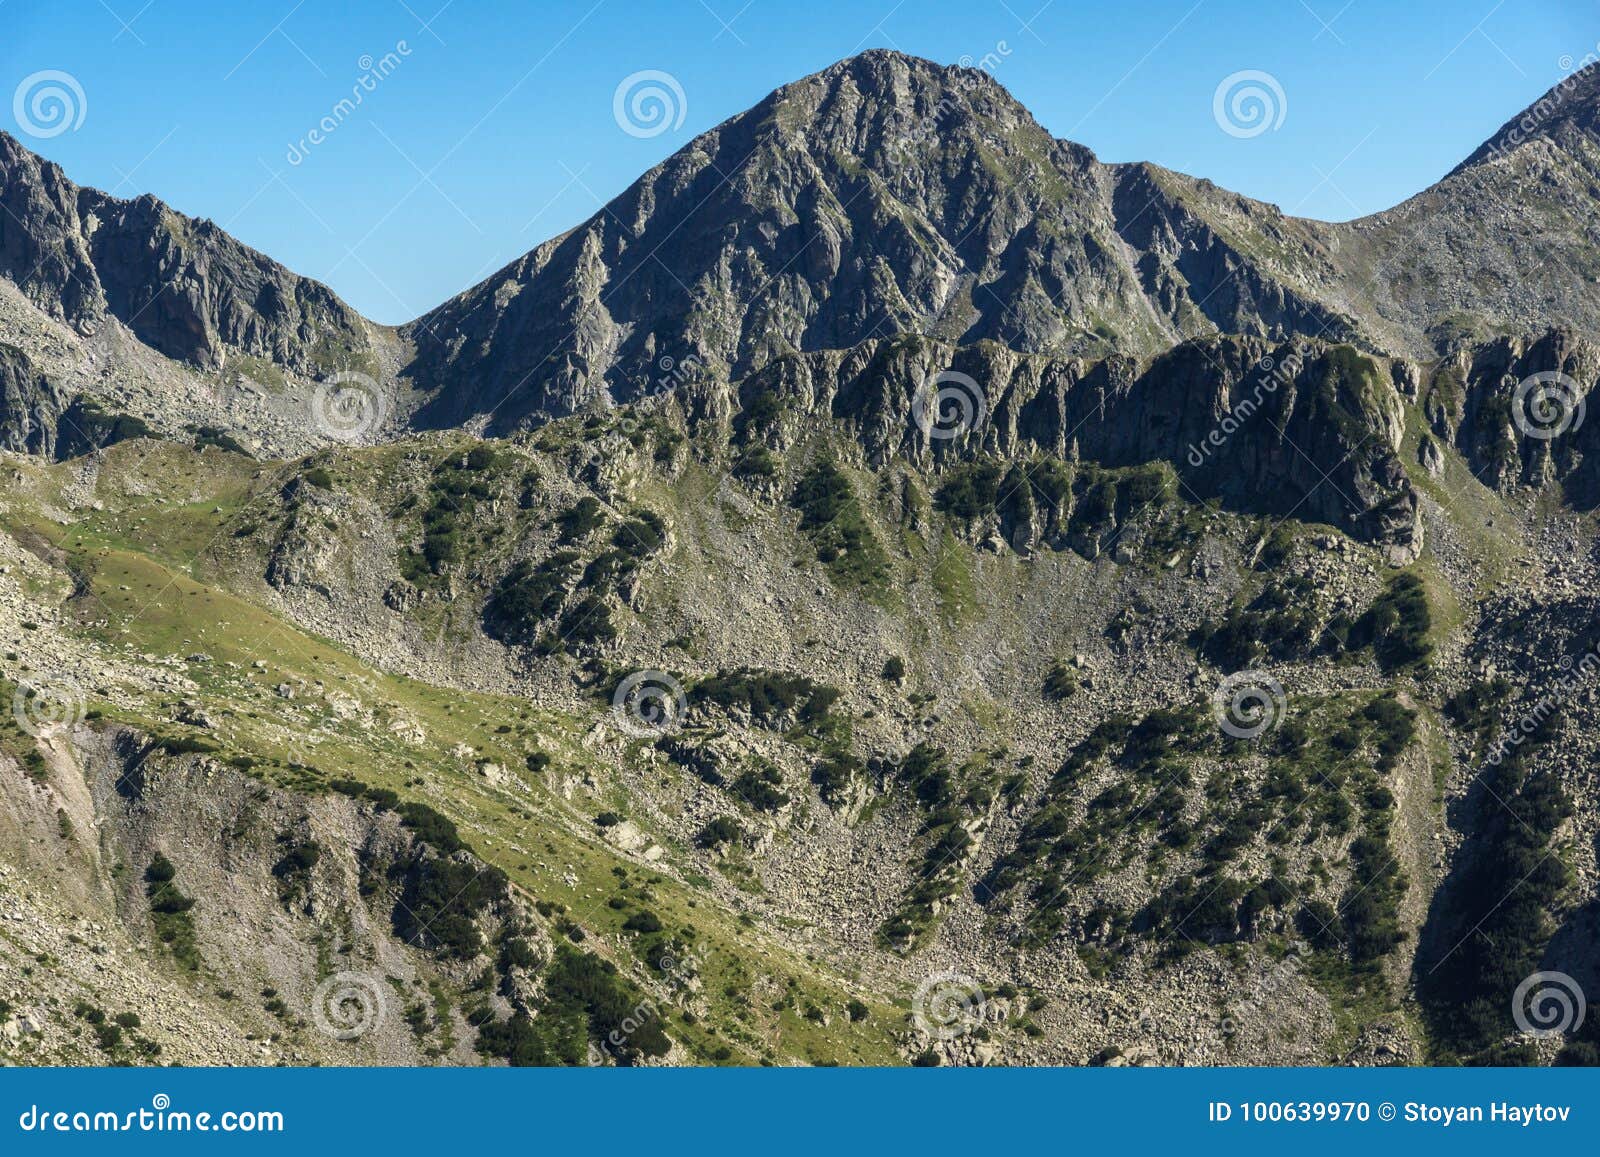 Amazing Landscape with the Tooth Peak, Pirin Mountain Stock Photo ...